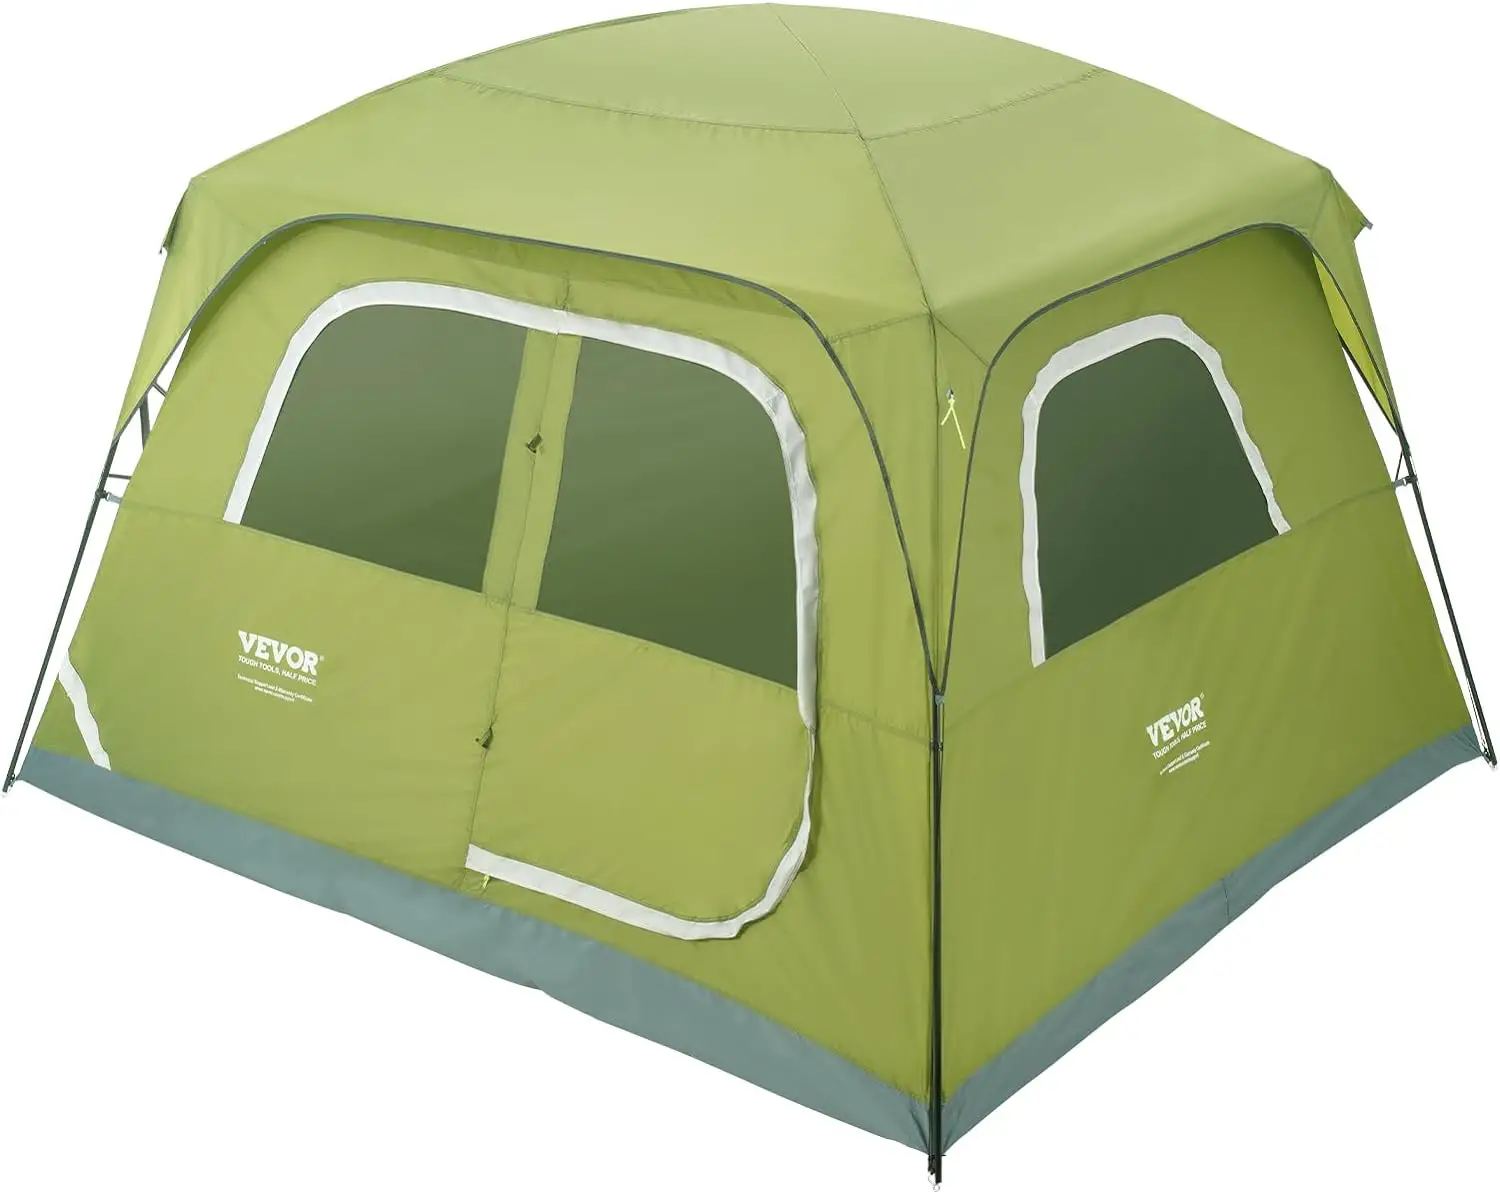 VEVOR Camping Tent Review